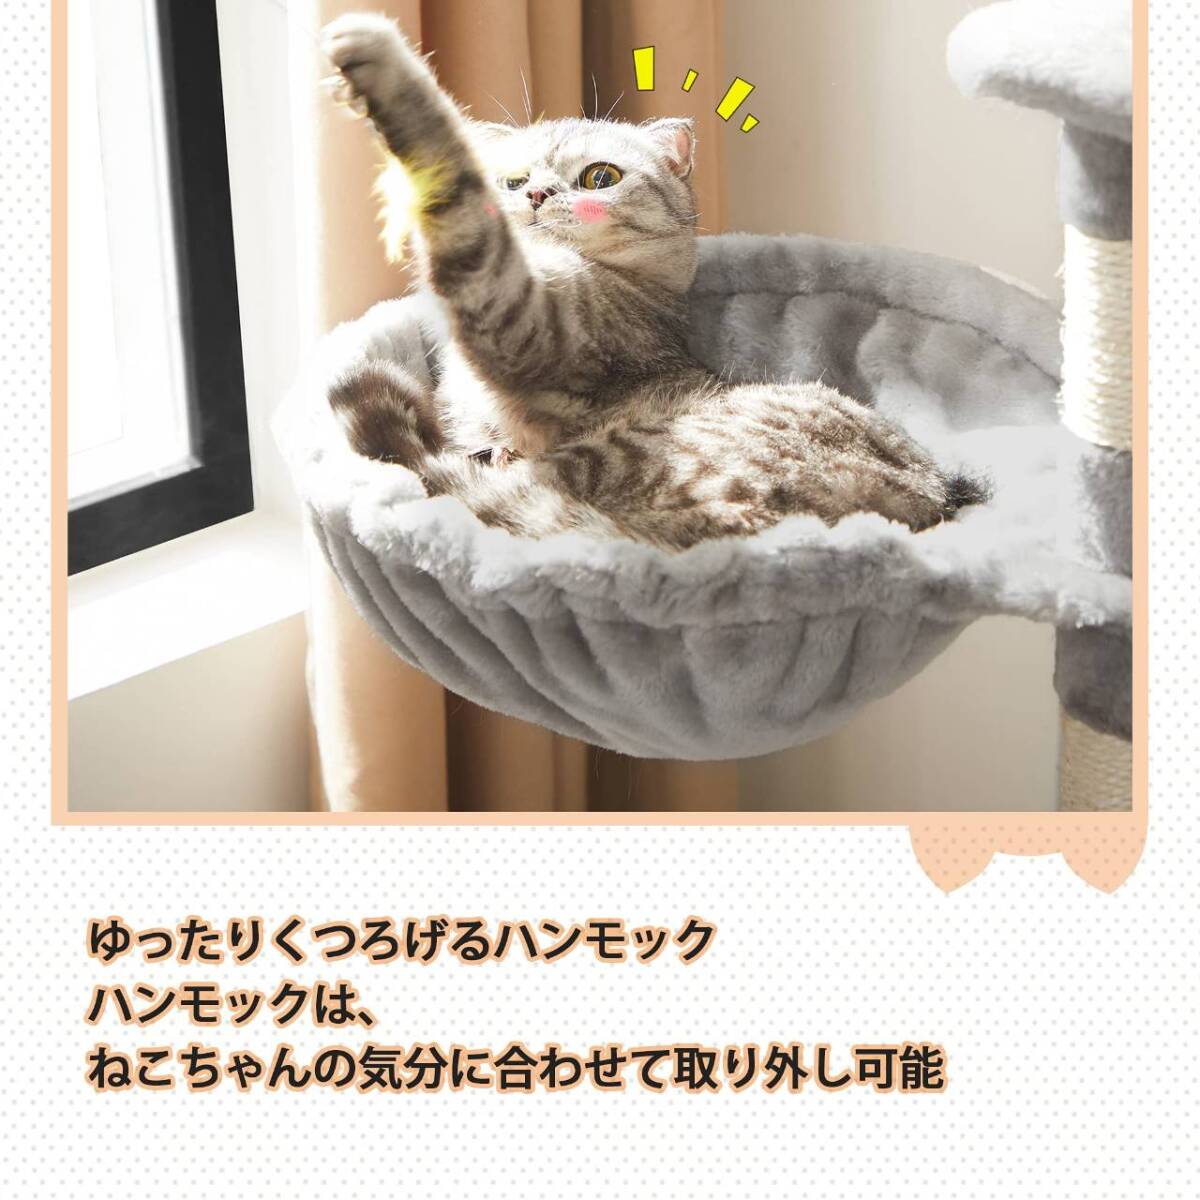  large cat .OK. for interior cat tower, hammock attaching 